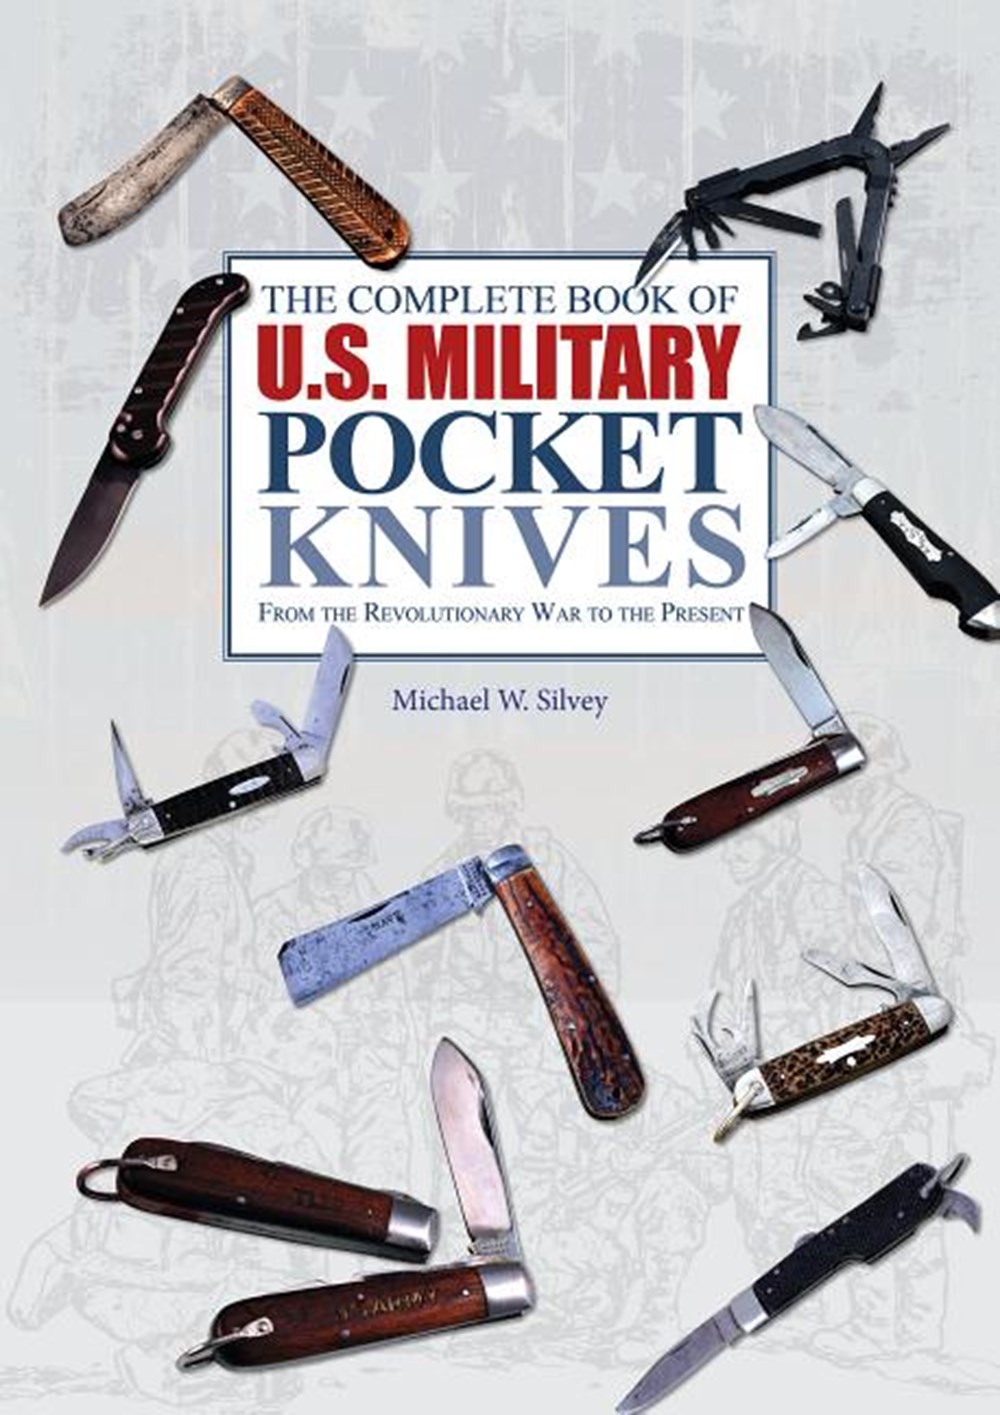 Complete Book of U.S. Military Pocket Knives: From the Revolutionary War to the Present